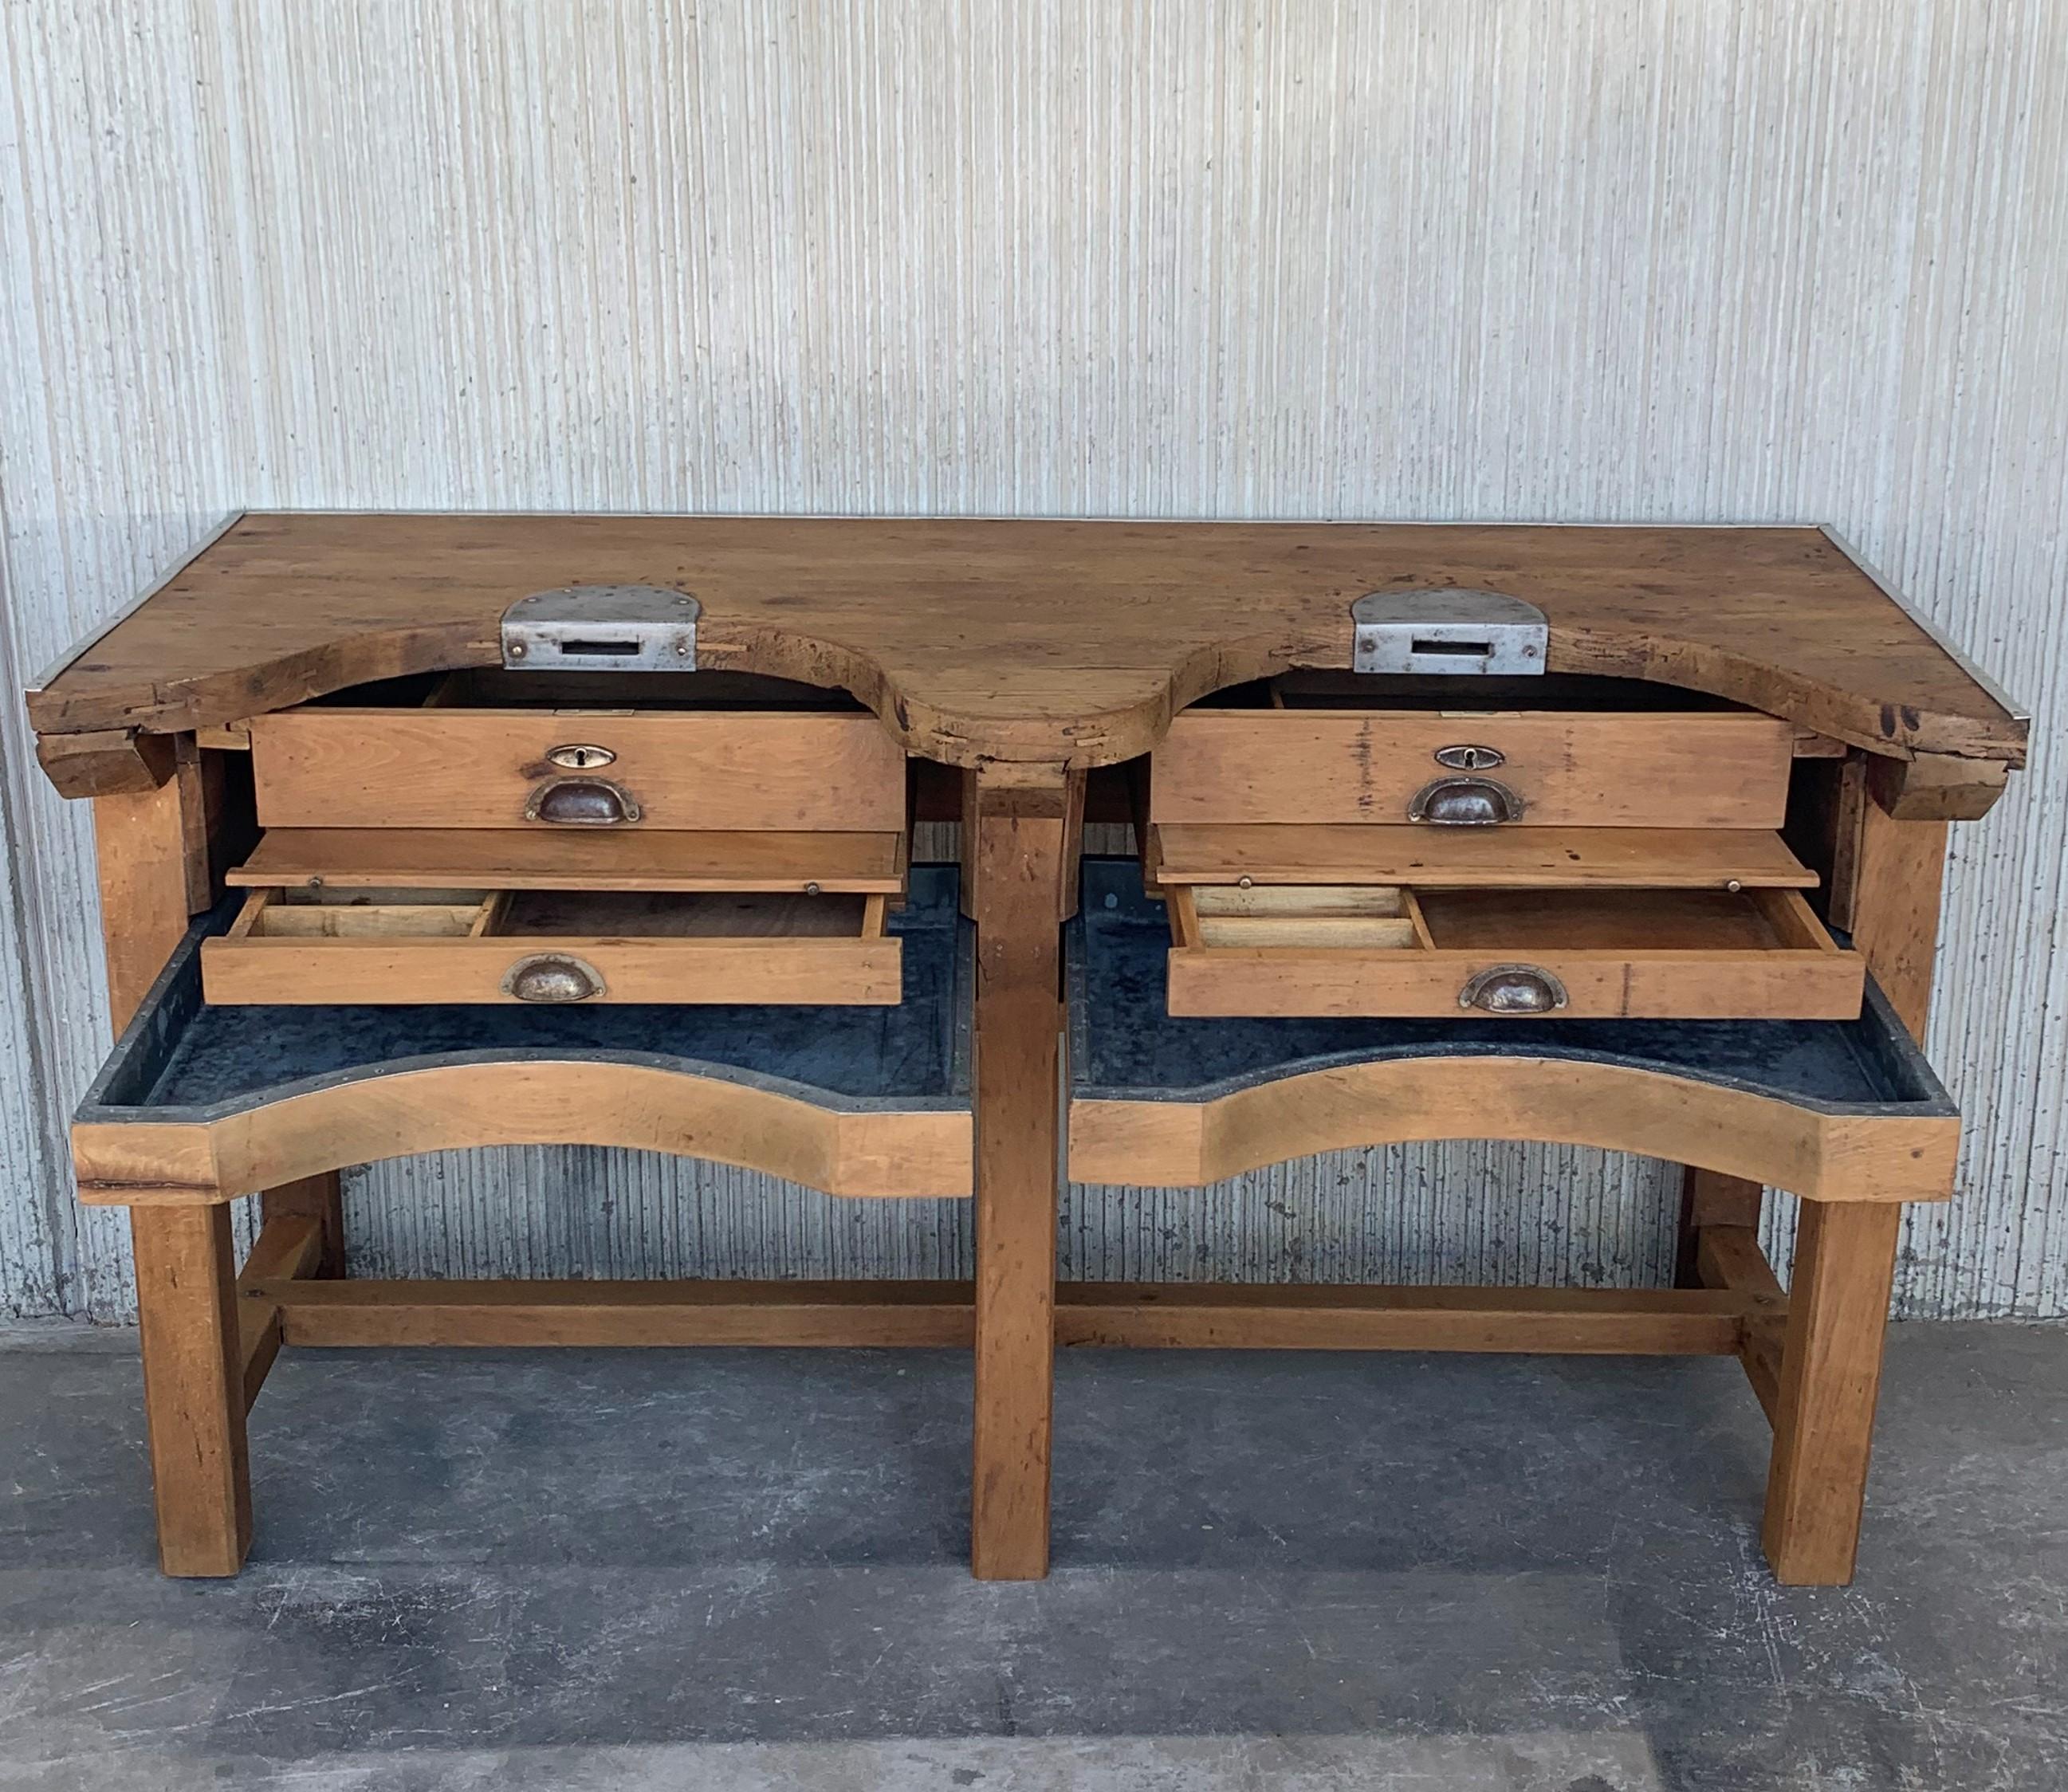 20th Century French Jewery Bench or Work Bench Table with Zinc-Lined Drawers and Compartment